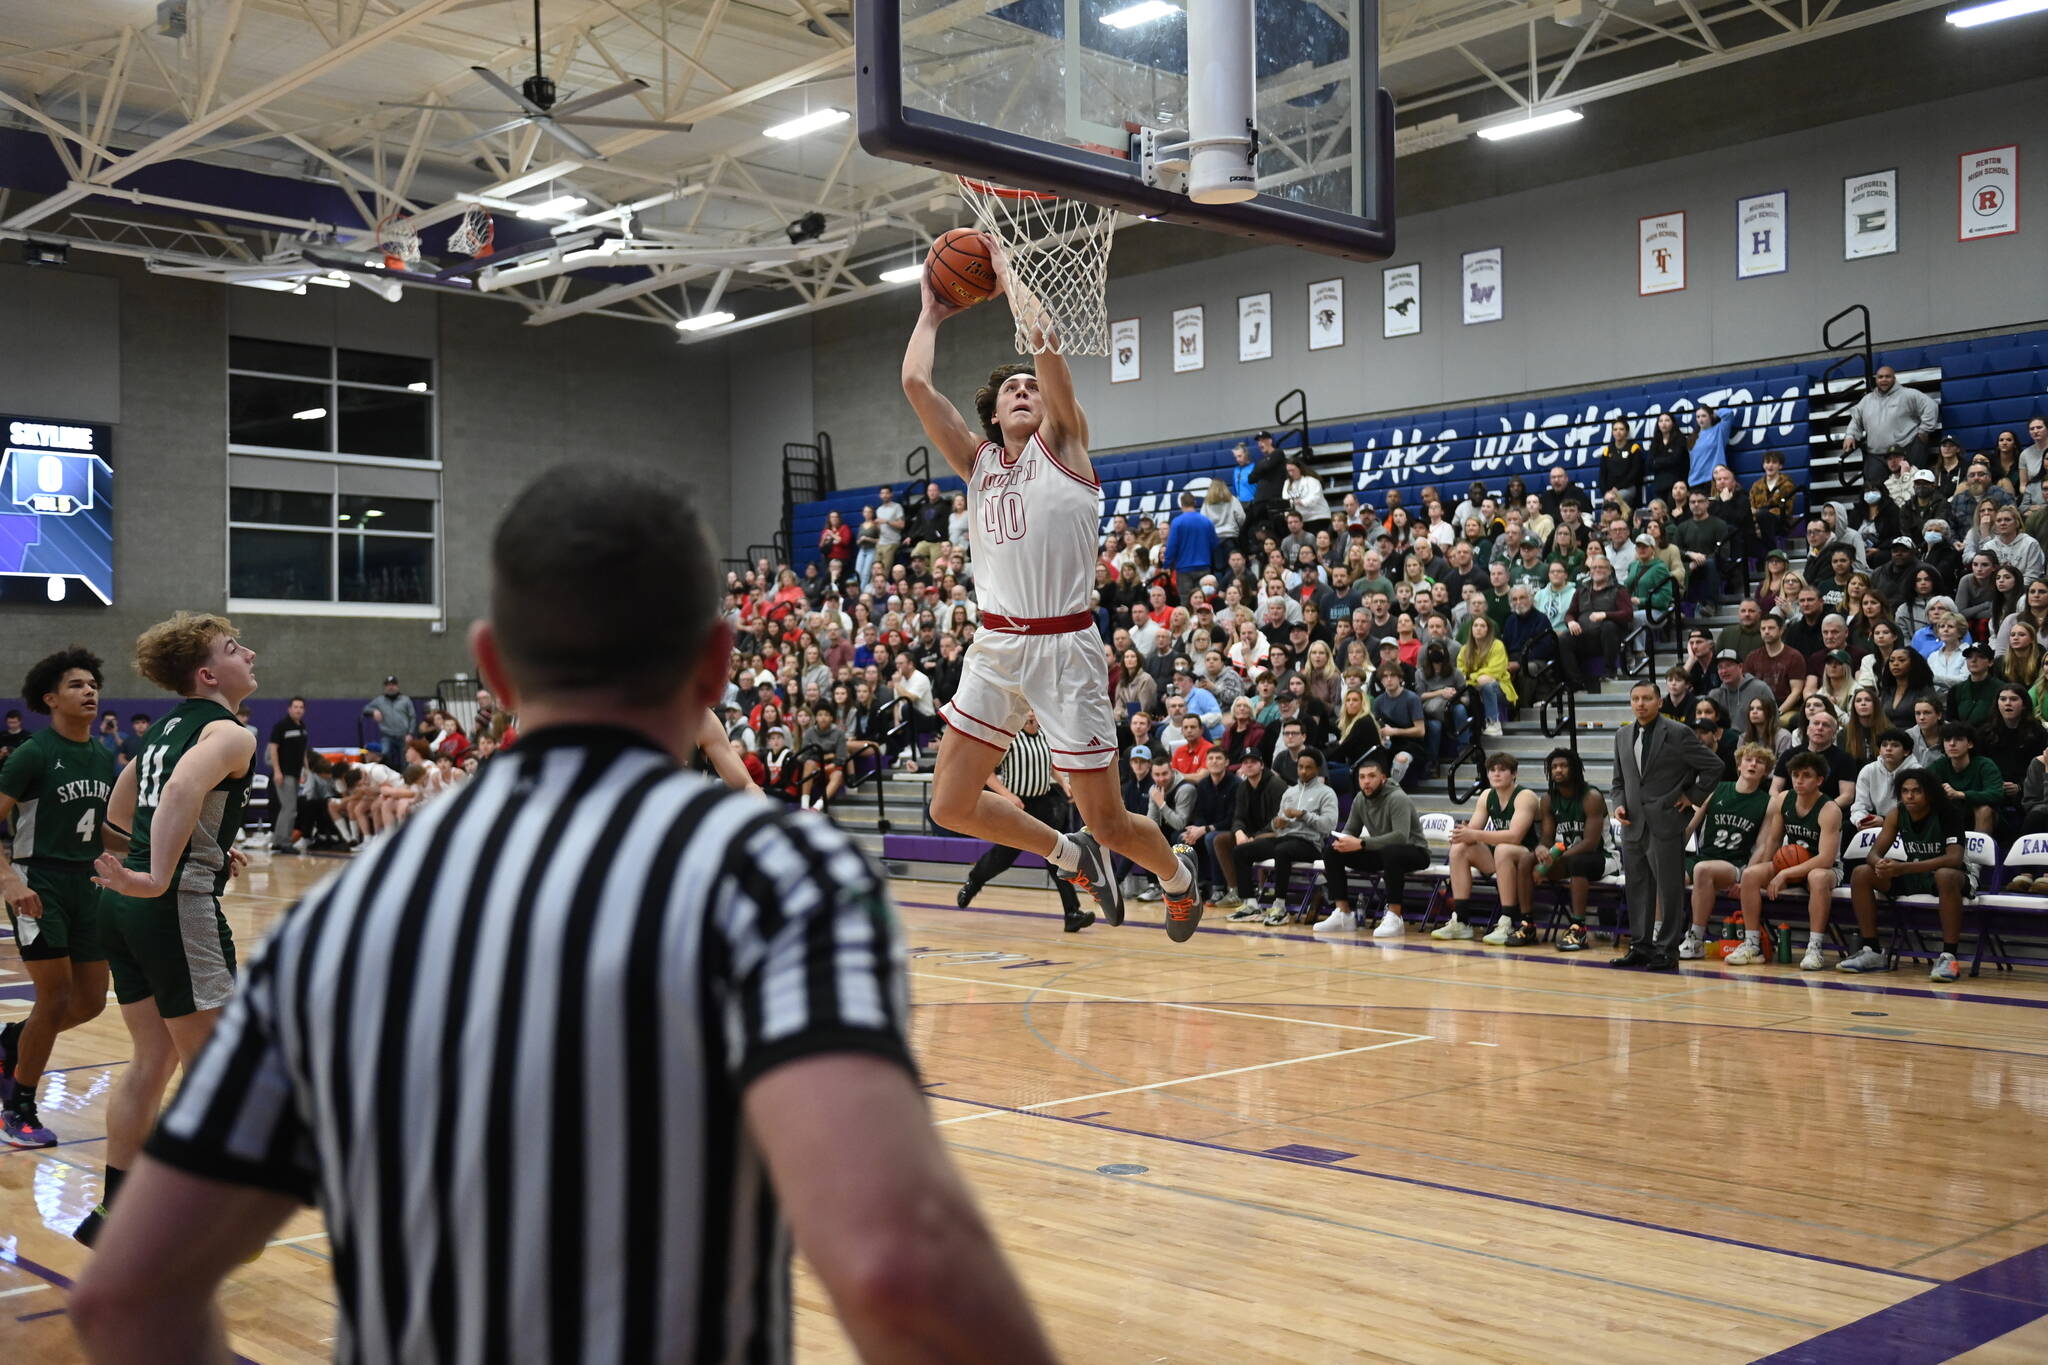 Mount Si Senior Miles Heide dunks the ball in the KingCo League championship game against Skyline on Feb. 4. Photo courtesy of Calder Productions.